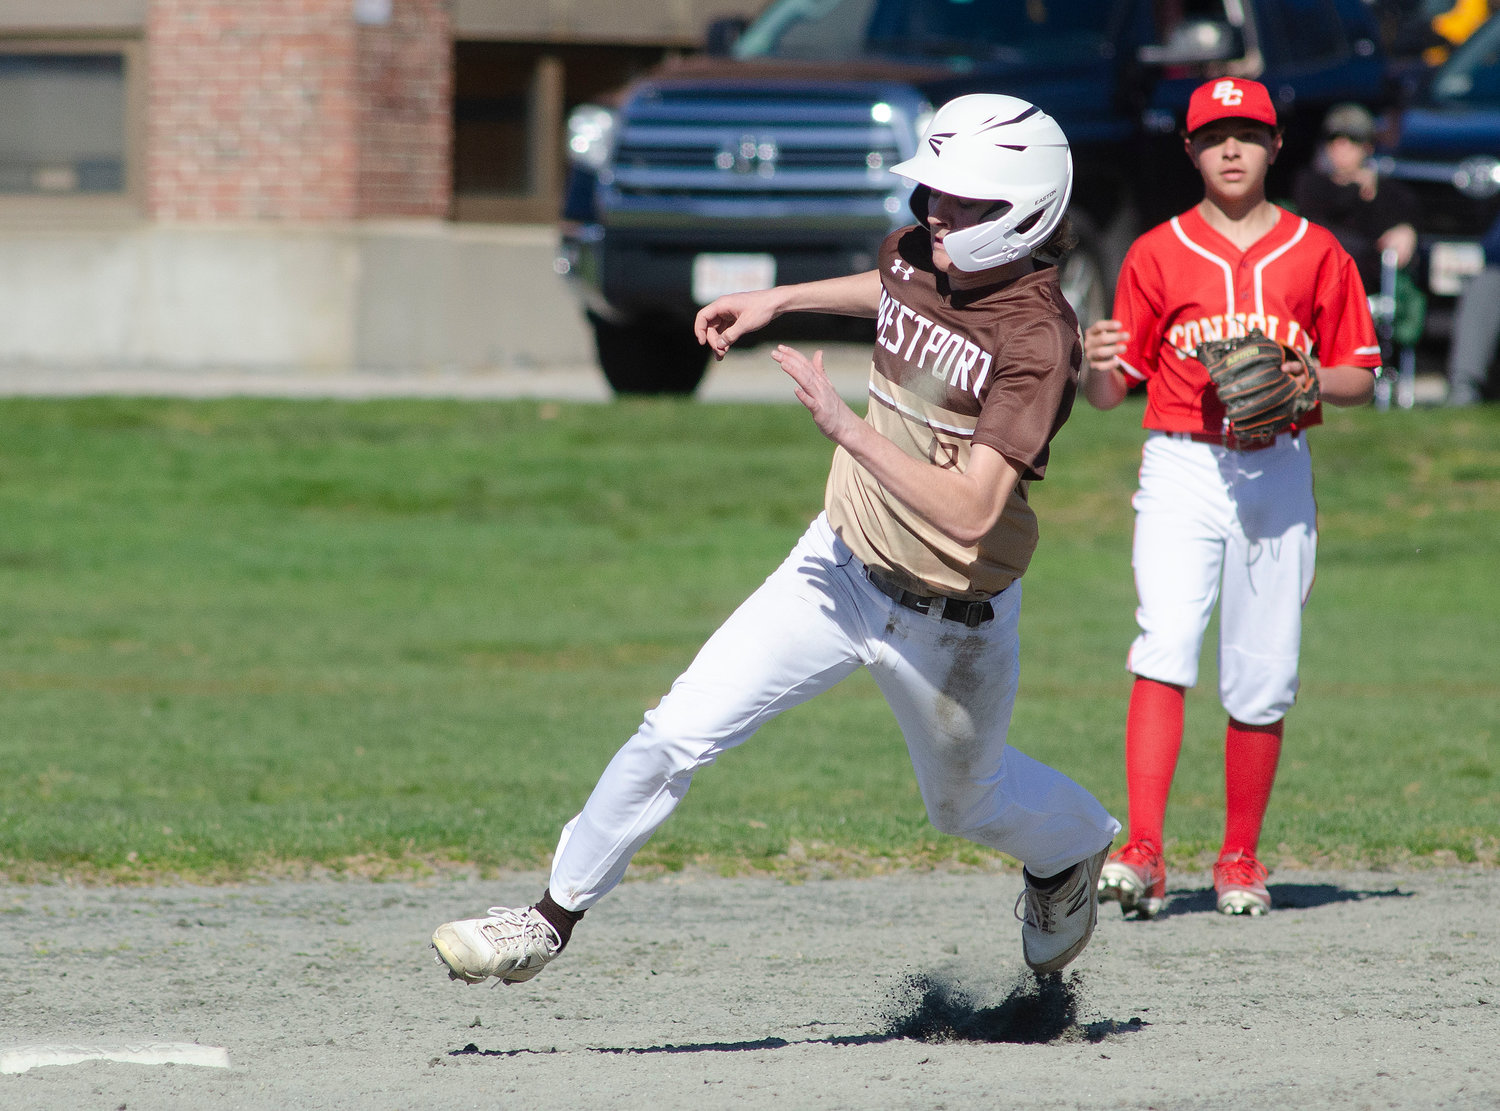 Cam Leary rounds second base and heads for third on Ben Boudria’s double in the second inning. Leary scored on the play.